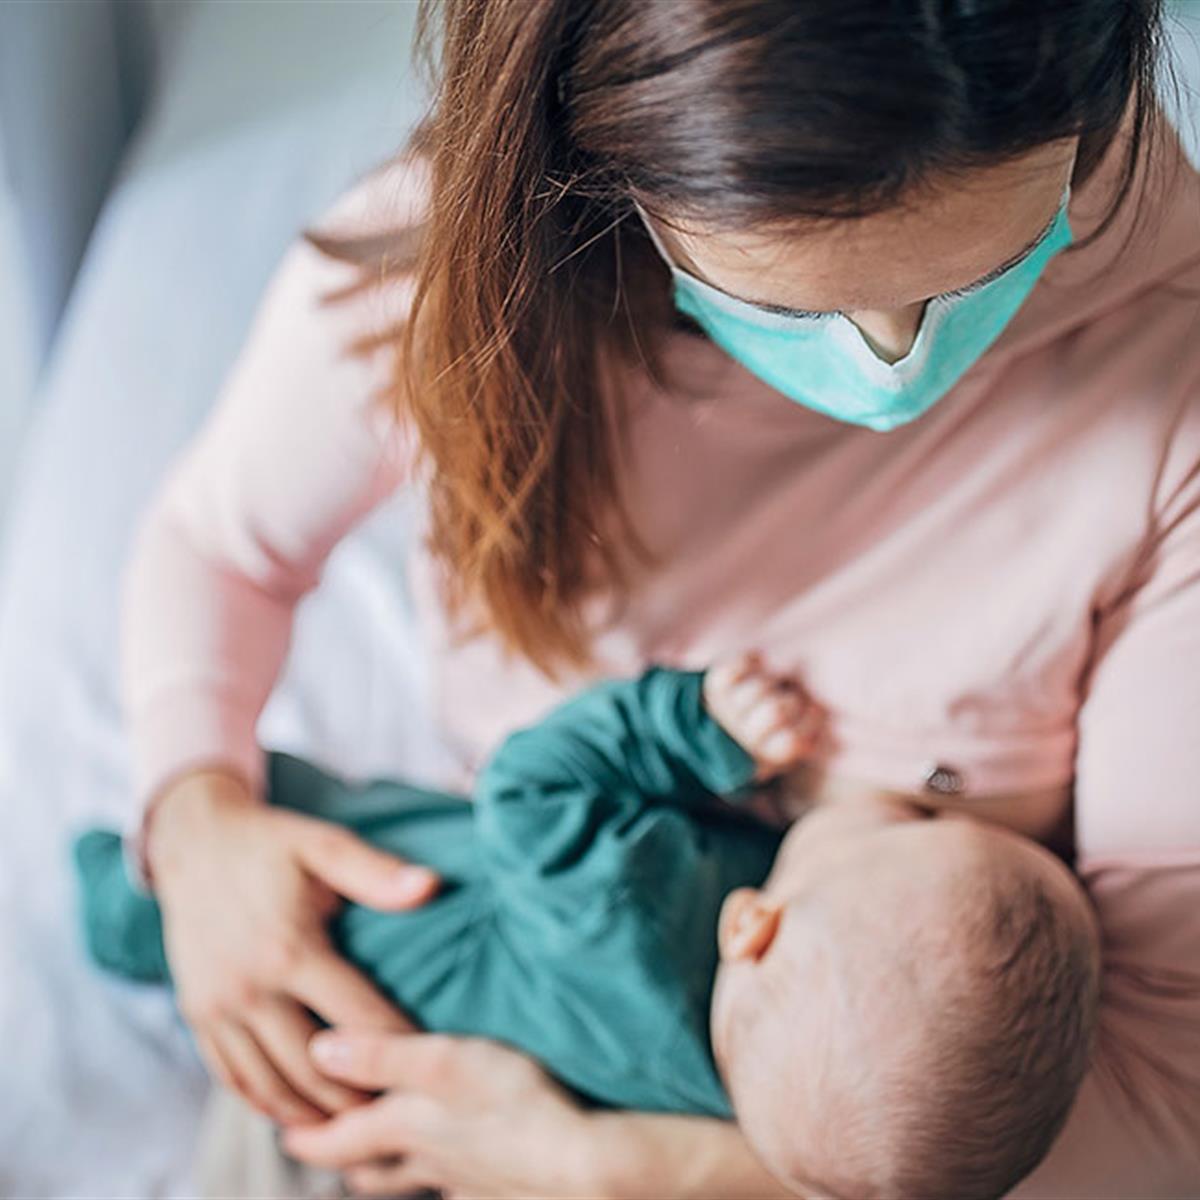 Breastfeeding & COVID-19: What Parents Need to Know - HealthyChildren.org